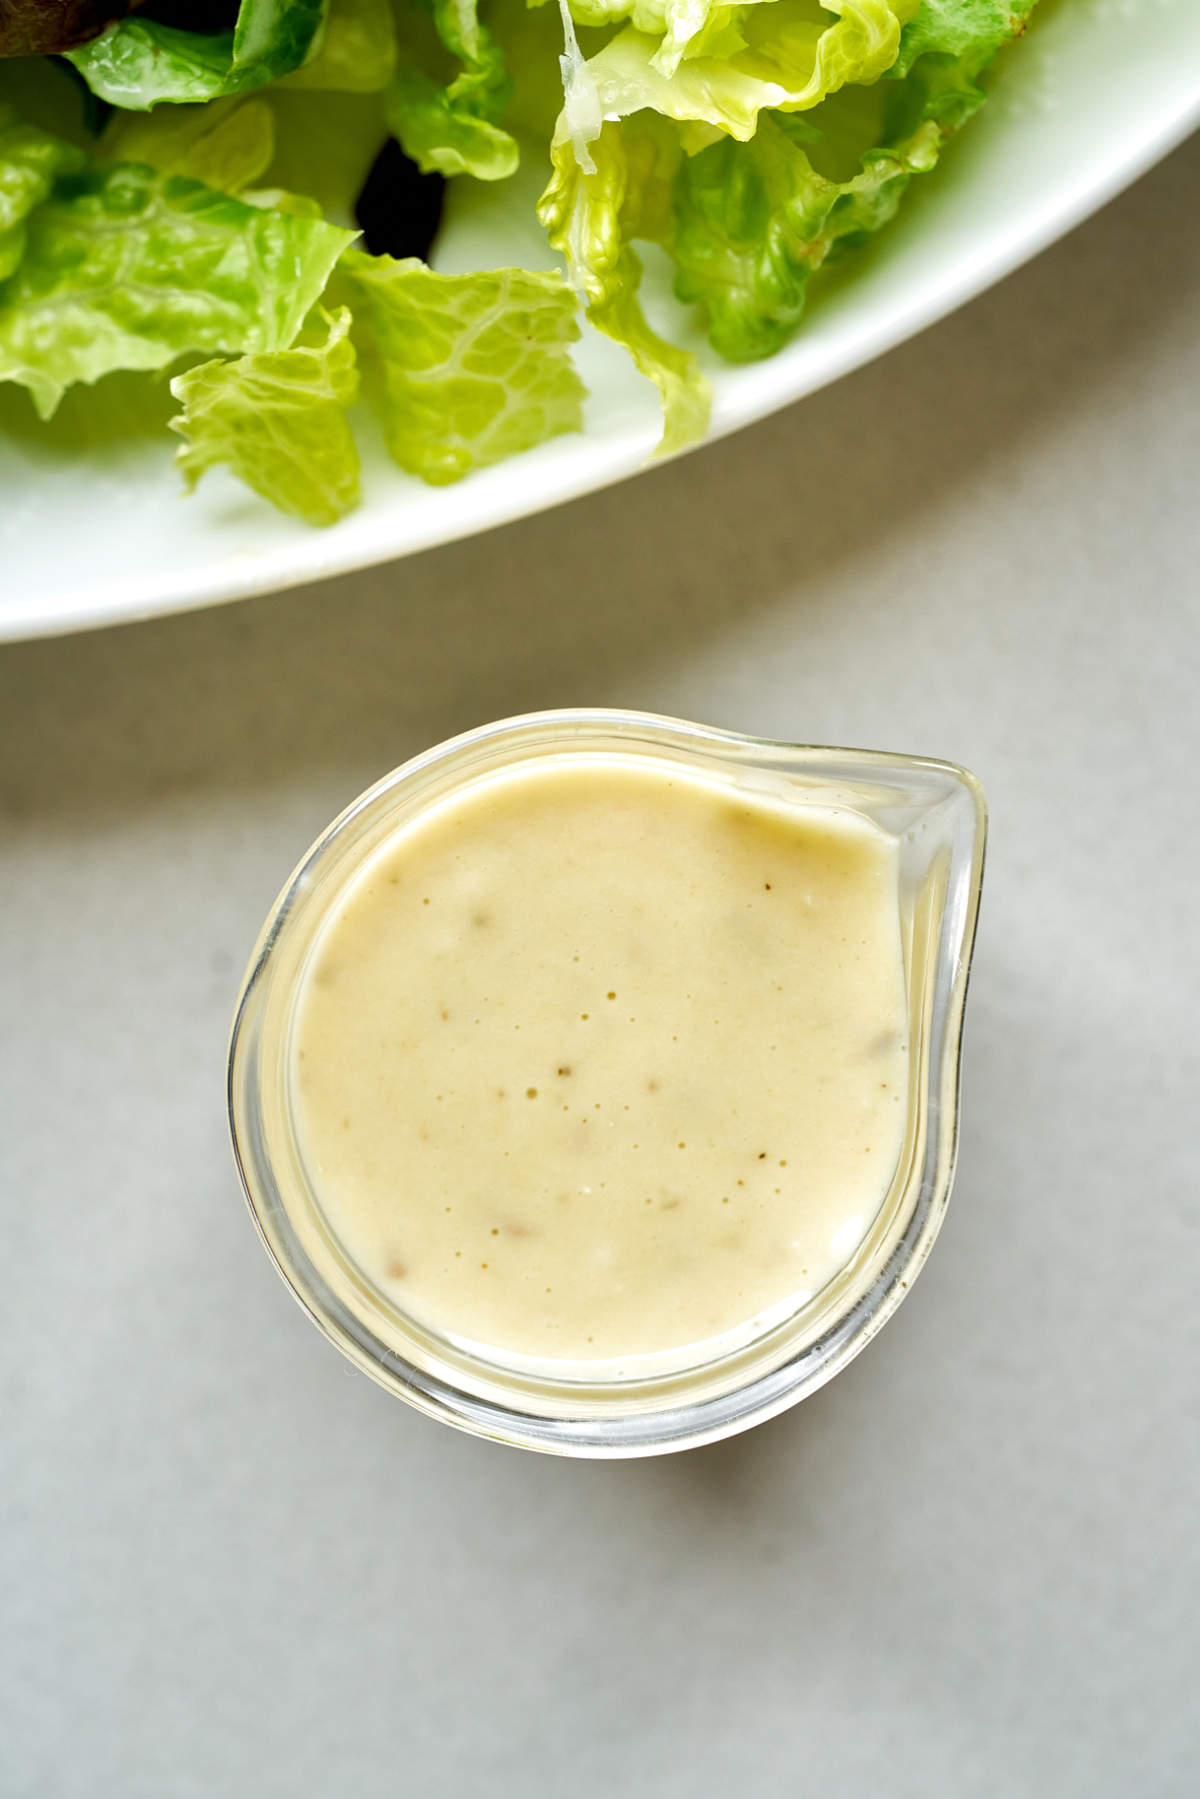 Top view of caesar salad dressing in a glass beaker next to a plate of lettuce.